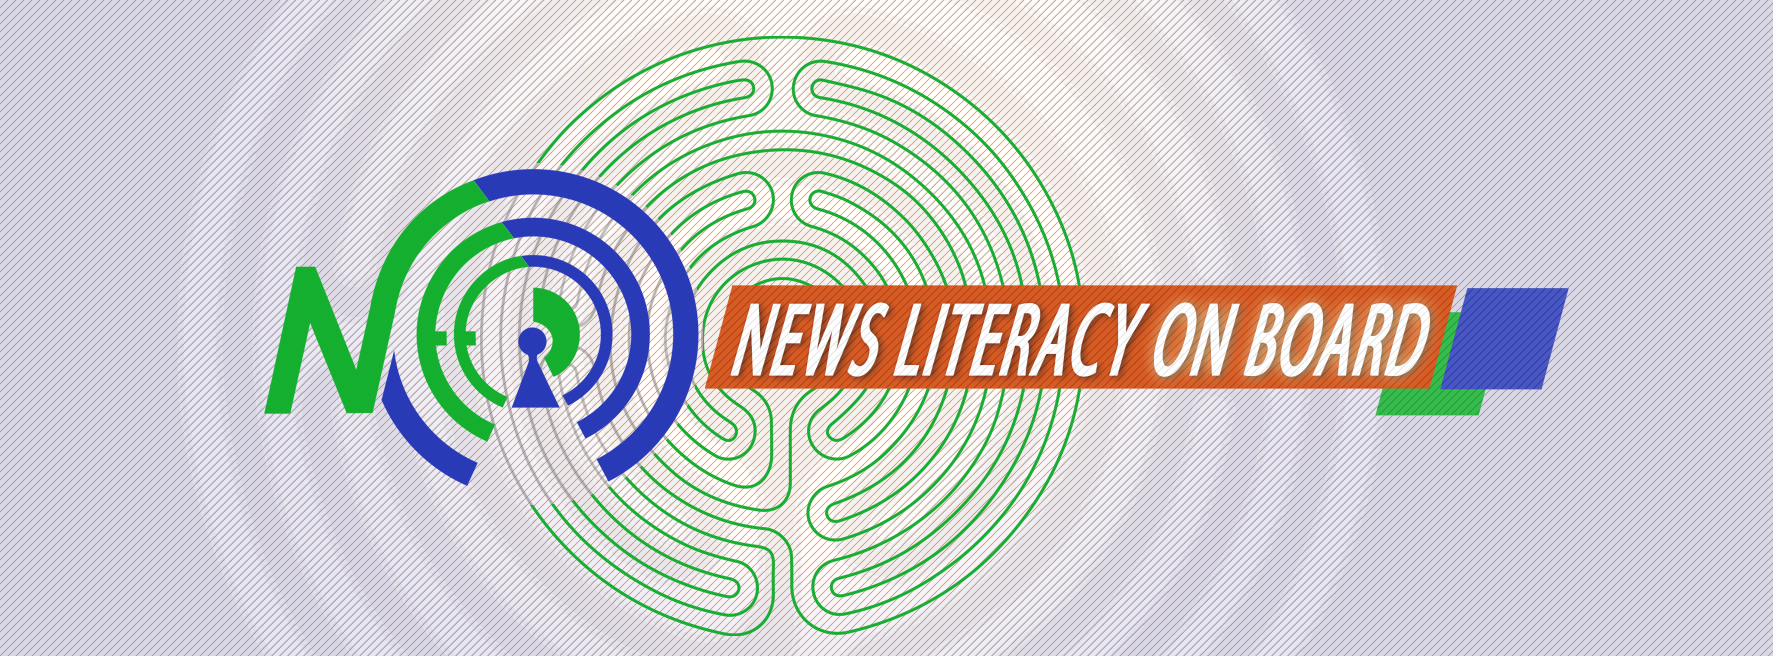 Launch of “NEED – News Literacy on Board” Project